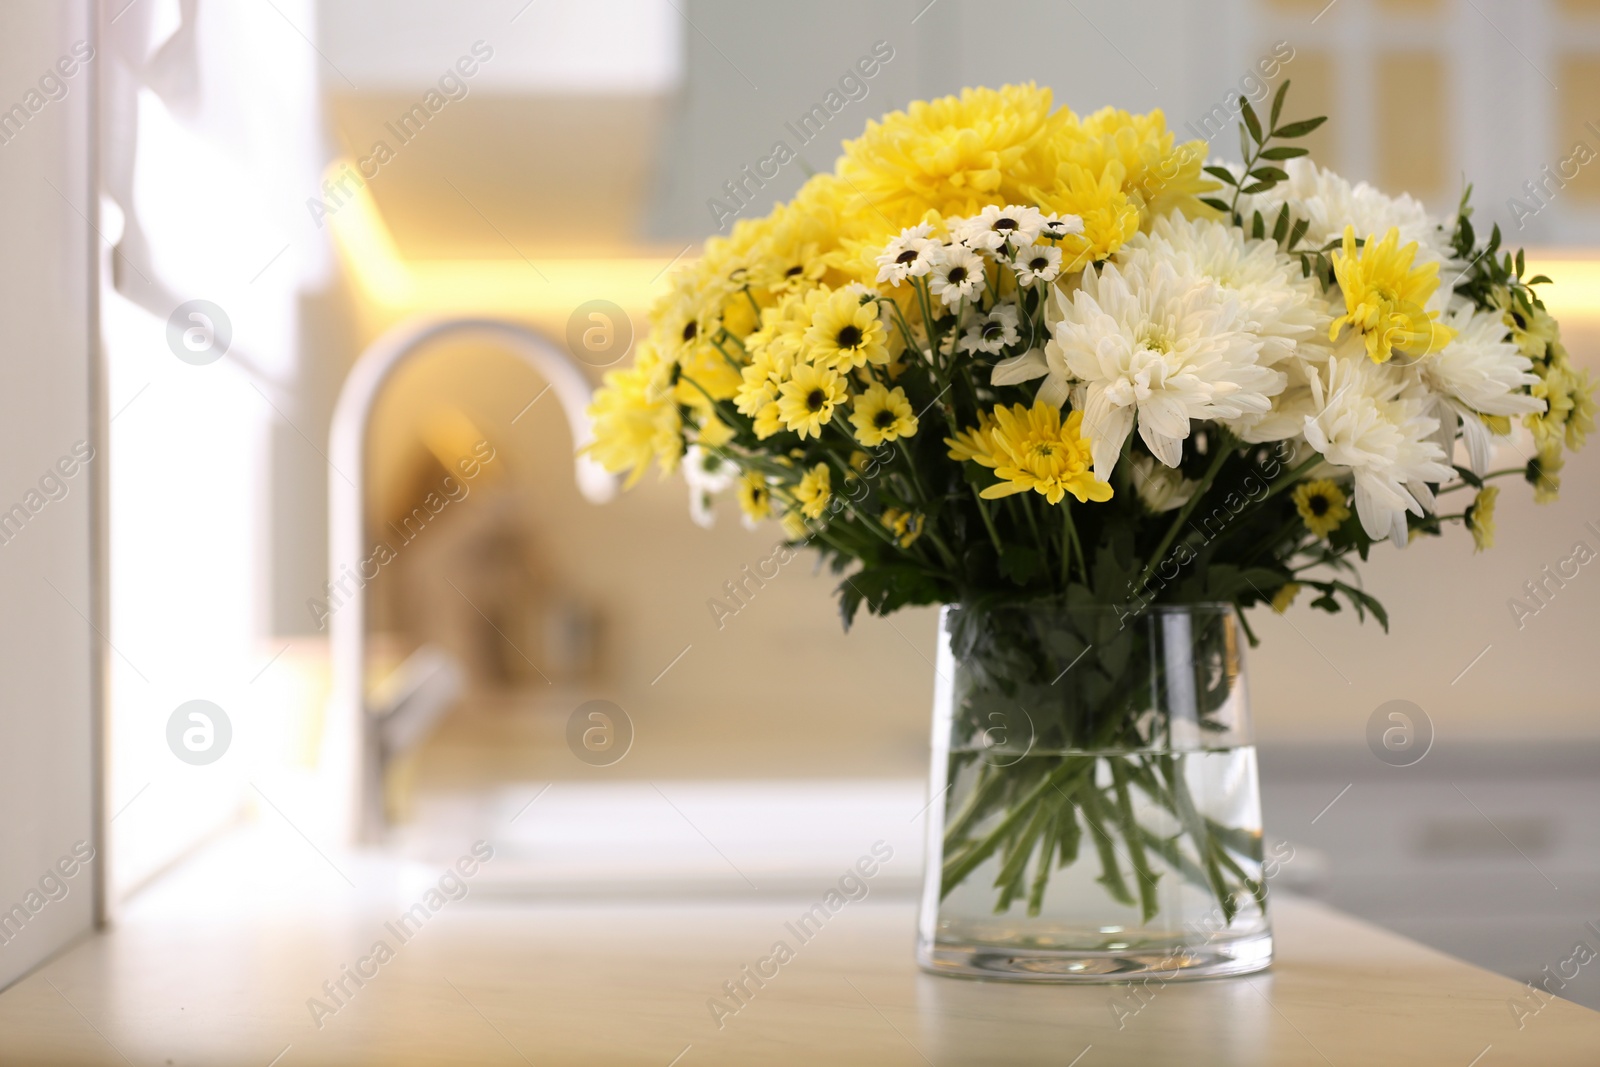 Photo of Vase with beautiful chrysanthemum flowers on countertop in kitchen, space for text. Interior design